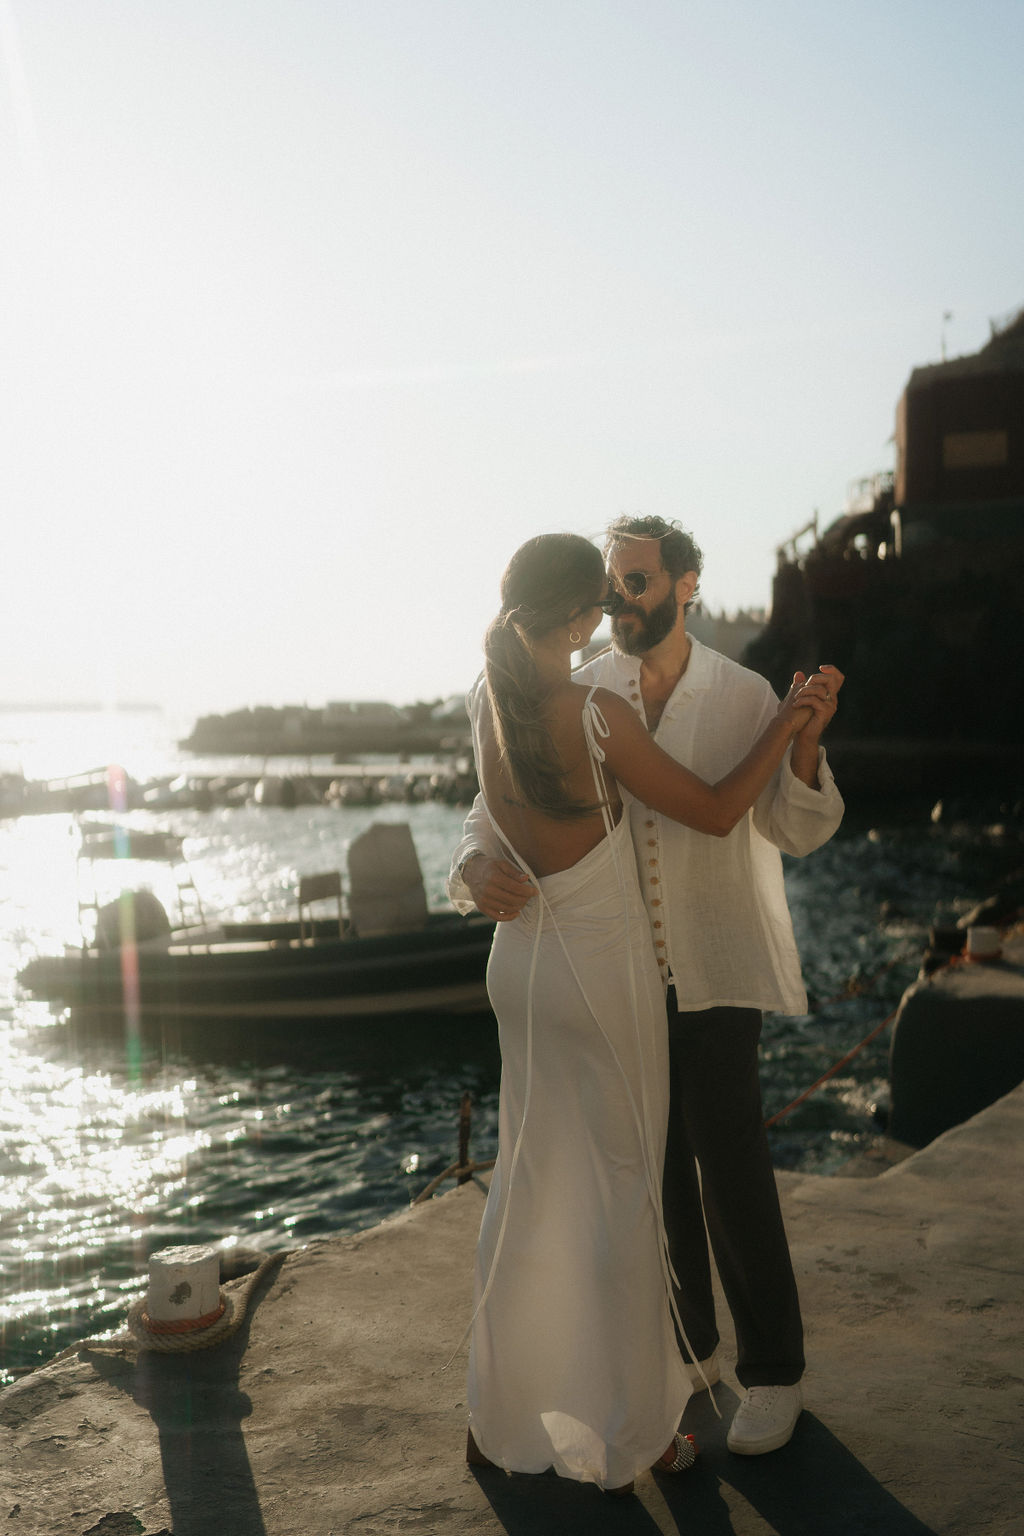 A couple dancing along a seaside, with the woman wearing a white dress and the man in a white shirt 